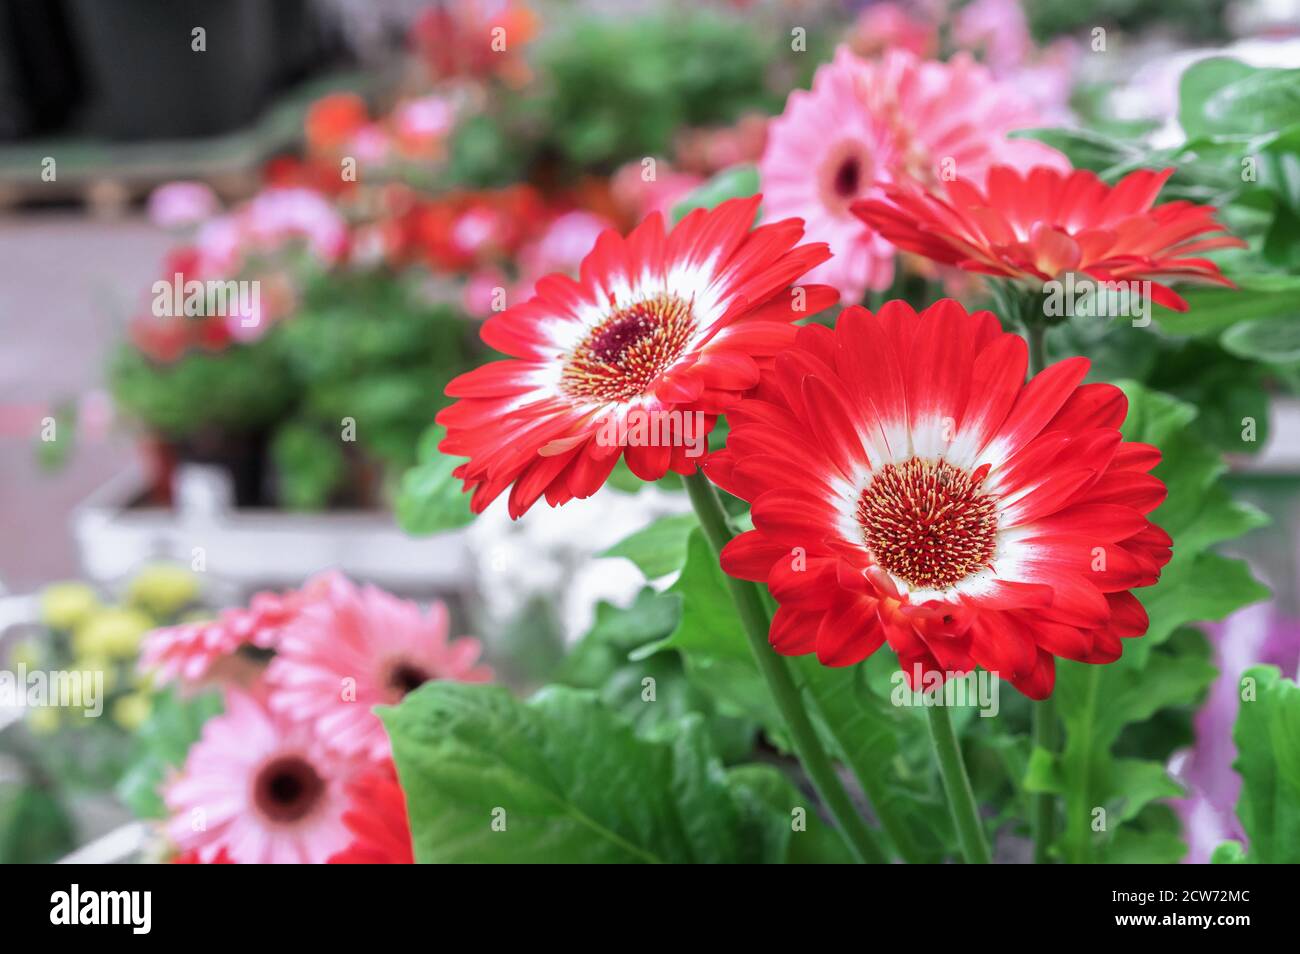 Red-white flowers of gerbera or transvaal daisy on a background of green foliage. Stock Photo